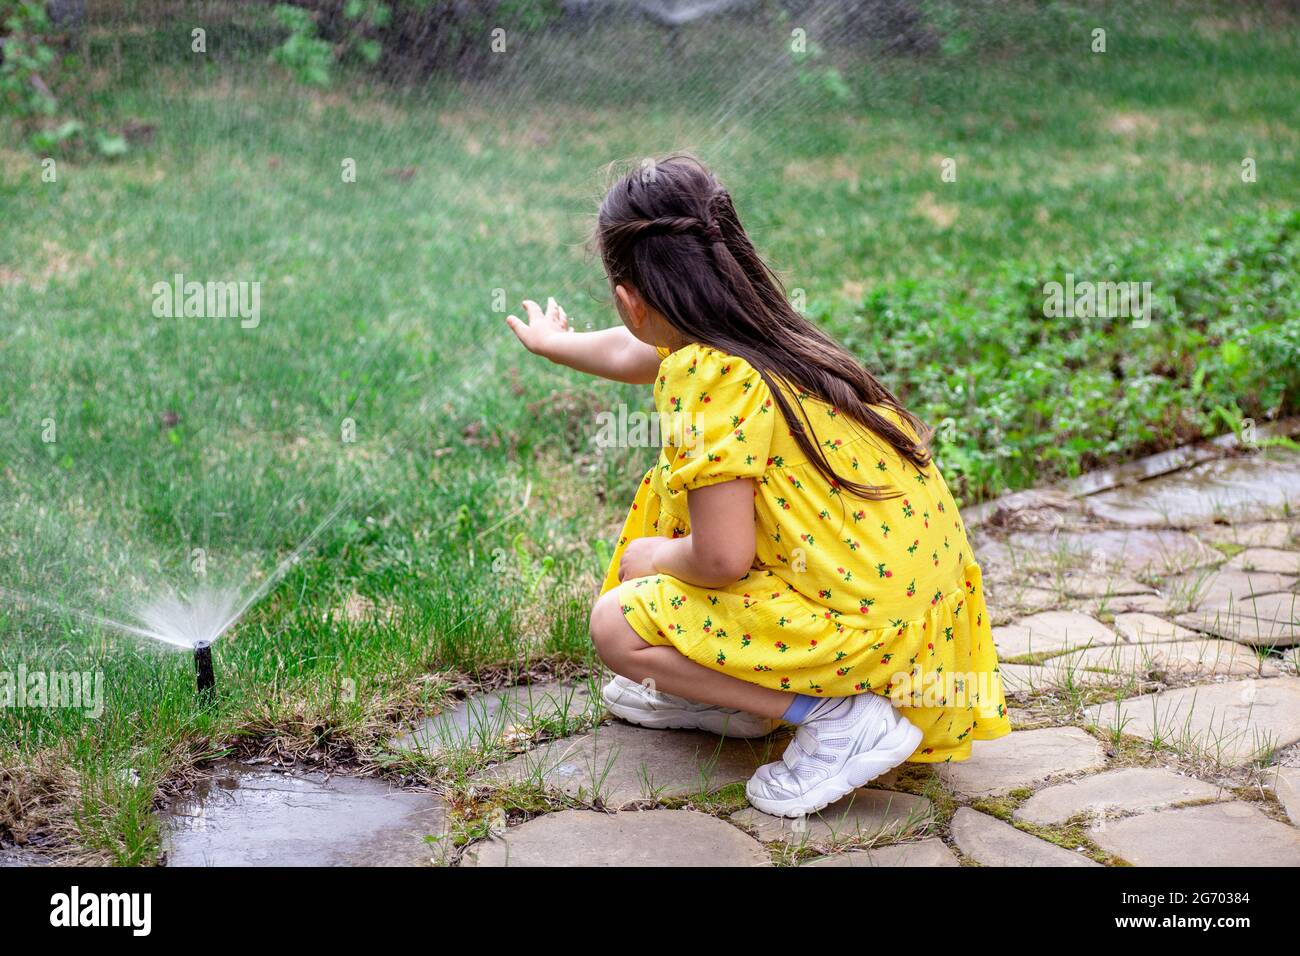 rear view of a girl who is playing with water drops from a lawn sprinkler, a girl helps her parents to water the grass on the lawn Stock Photo